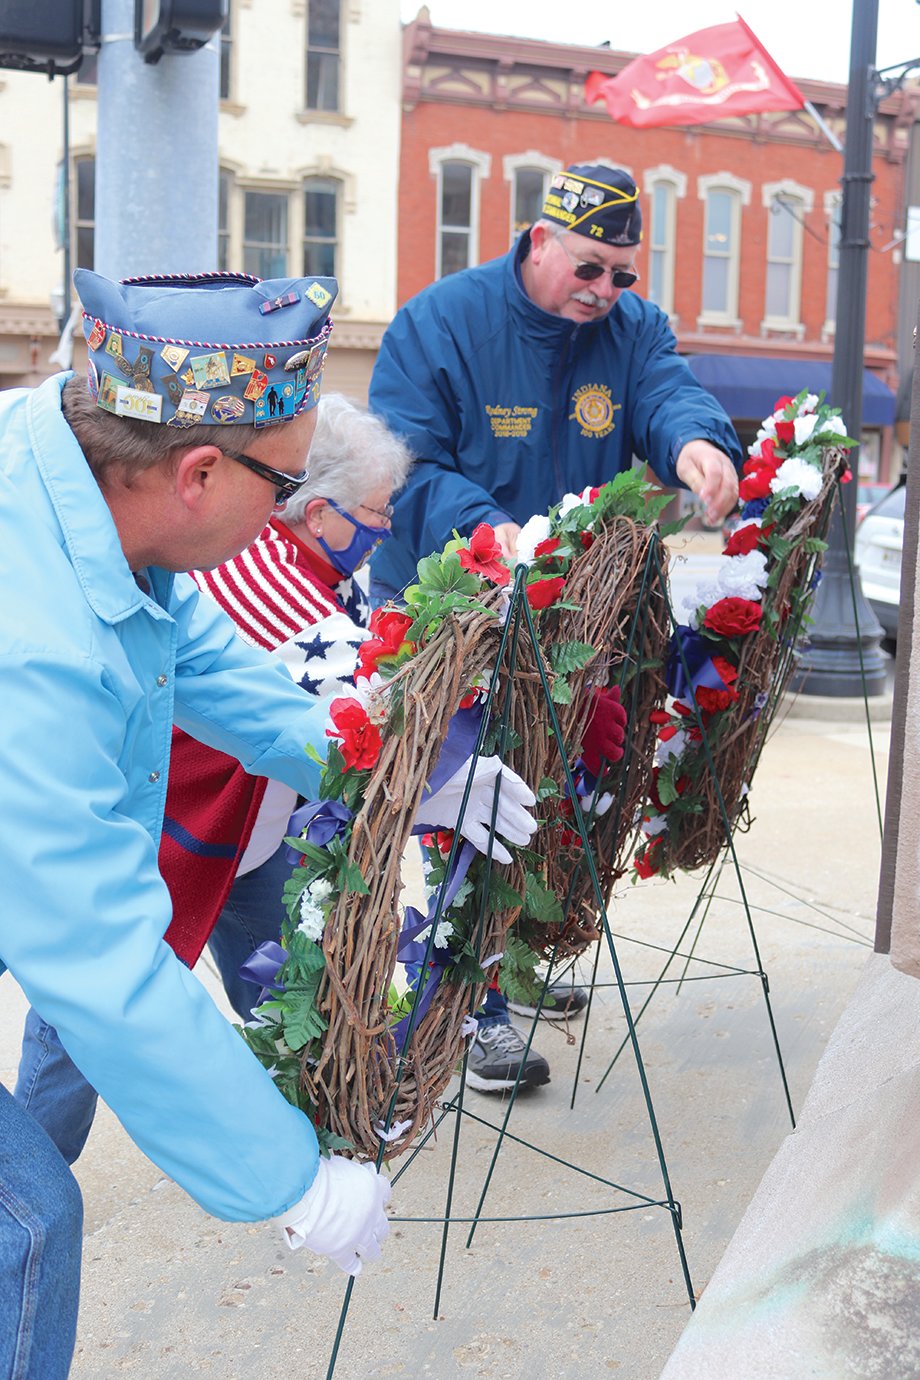 Keith Switzer, from left, Rosemary Hutchison and Rodney Strong place wreaths at the base of the Soldier's and Sailor's Monument in downtown Crawfordsville; the trio, which represents the Sons of the American Legion, Legion Auxiliary and Legion Post 72, respectively, performs the act every November on Veterans Day.